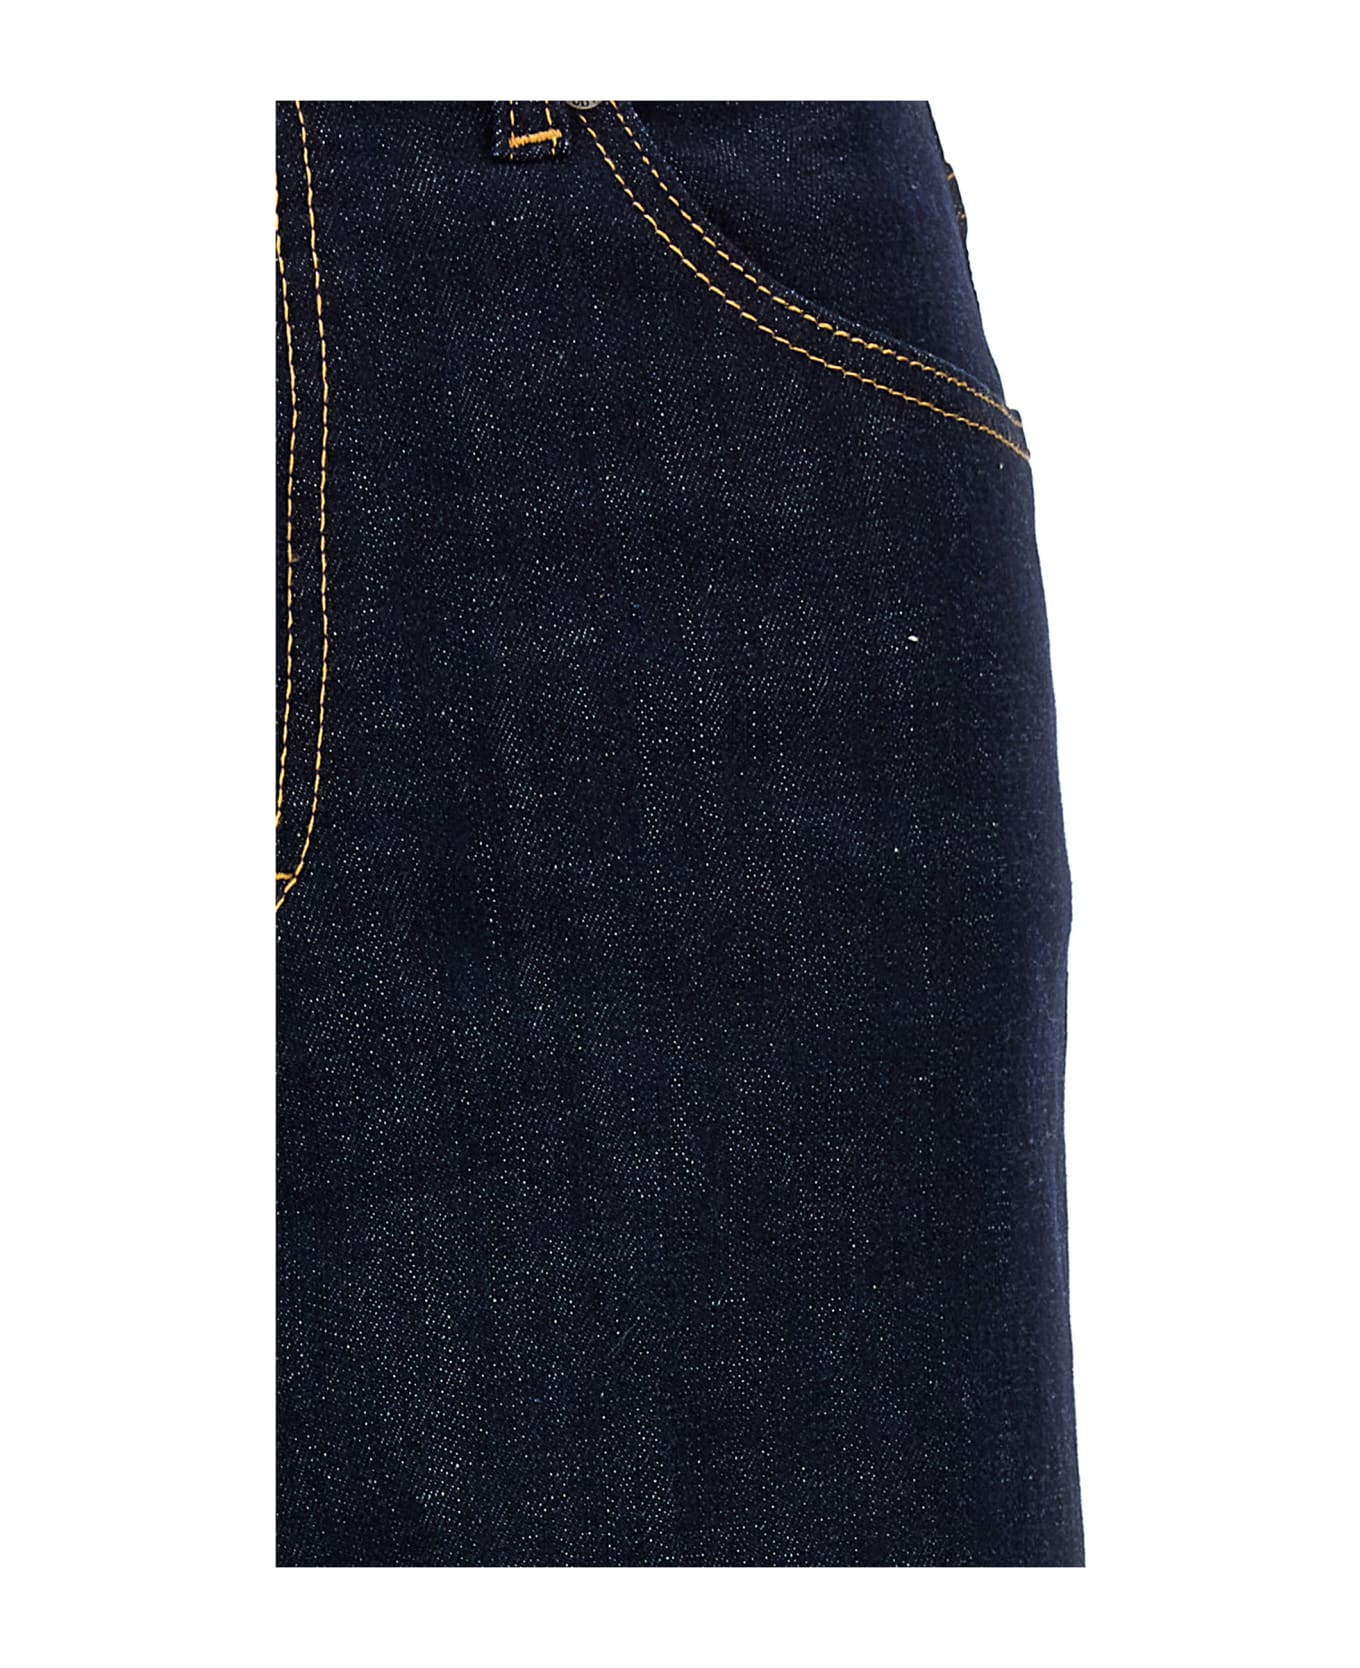 Dsquared2 Straight Jeans - Blue